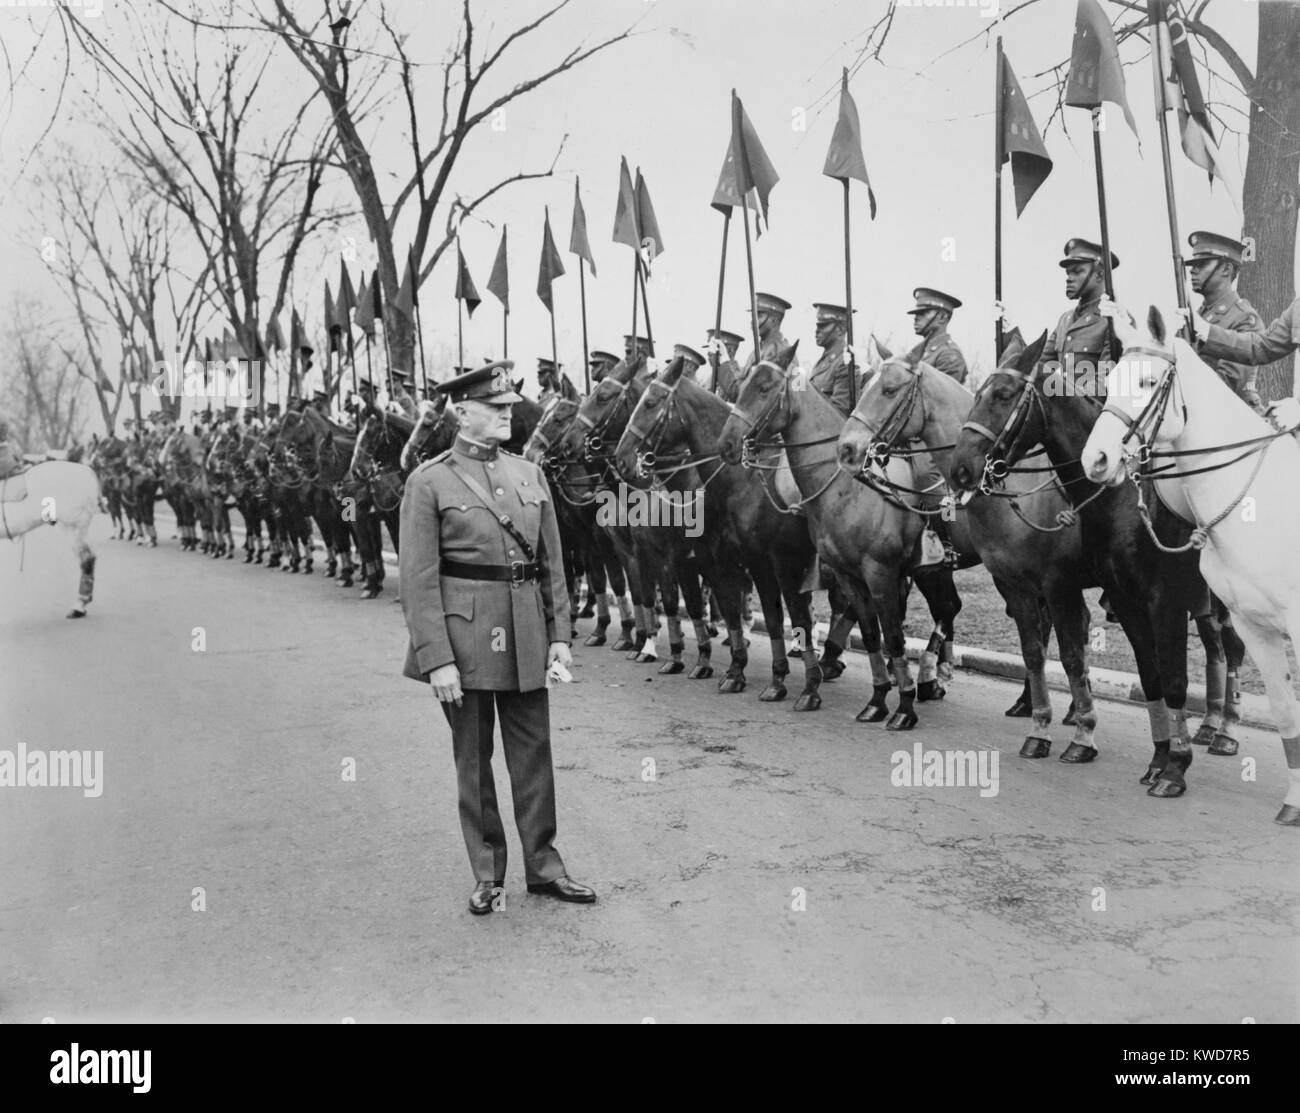 Il generale John Pershing revisione "Buffalo Soldiers' dell'African American decimo cavalleria. Ft. Myer, Virginia, 1932. (BSLOC_2015_16_133) Foto Stock